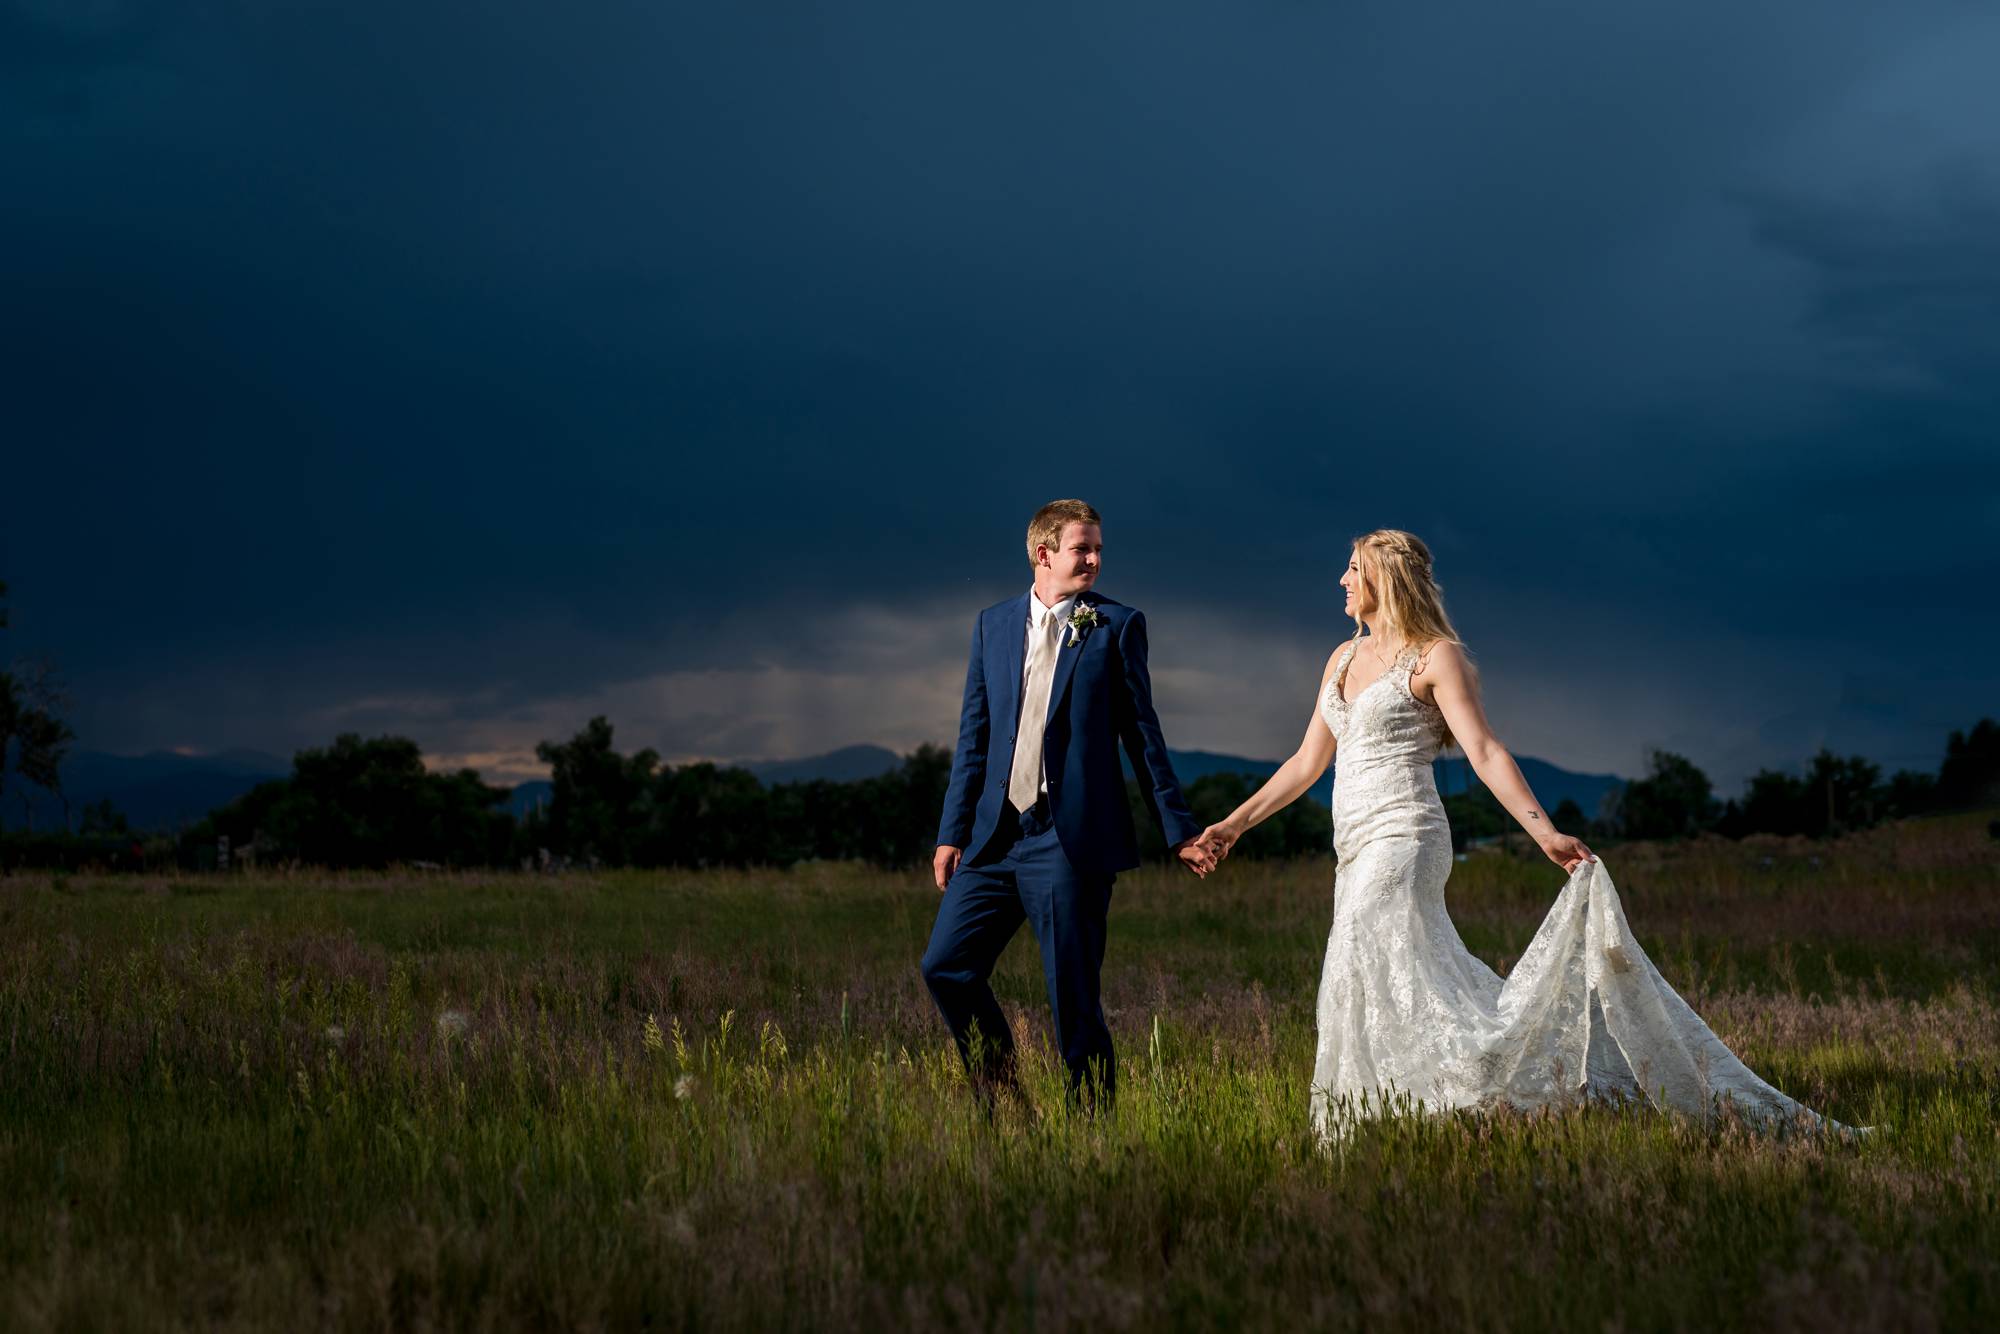 wedding couple at night durning a rain storm in Denver, CO